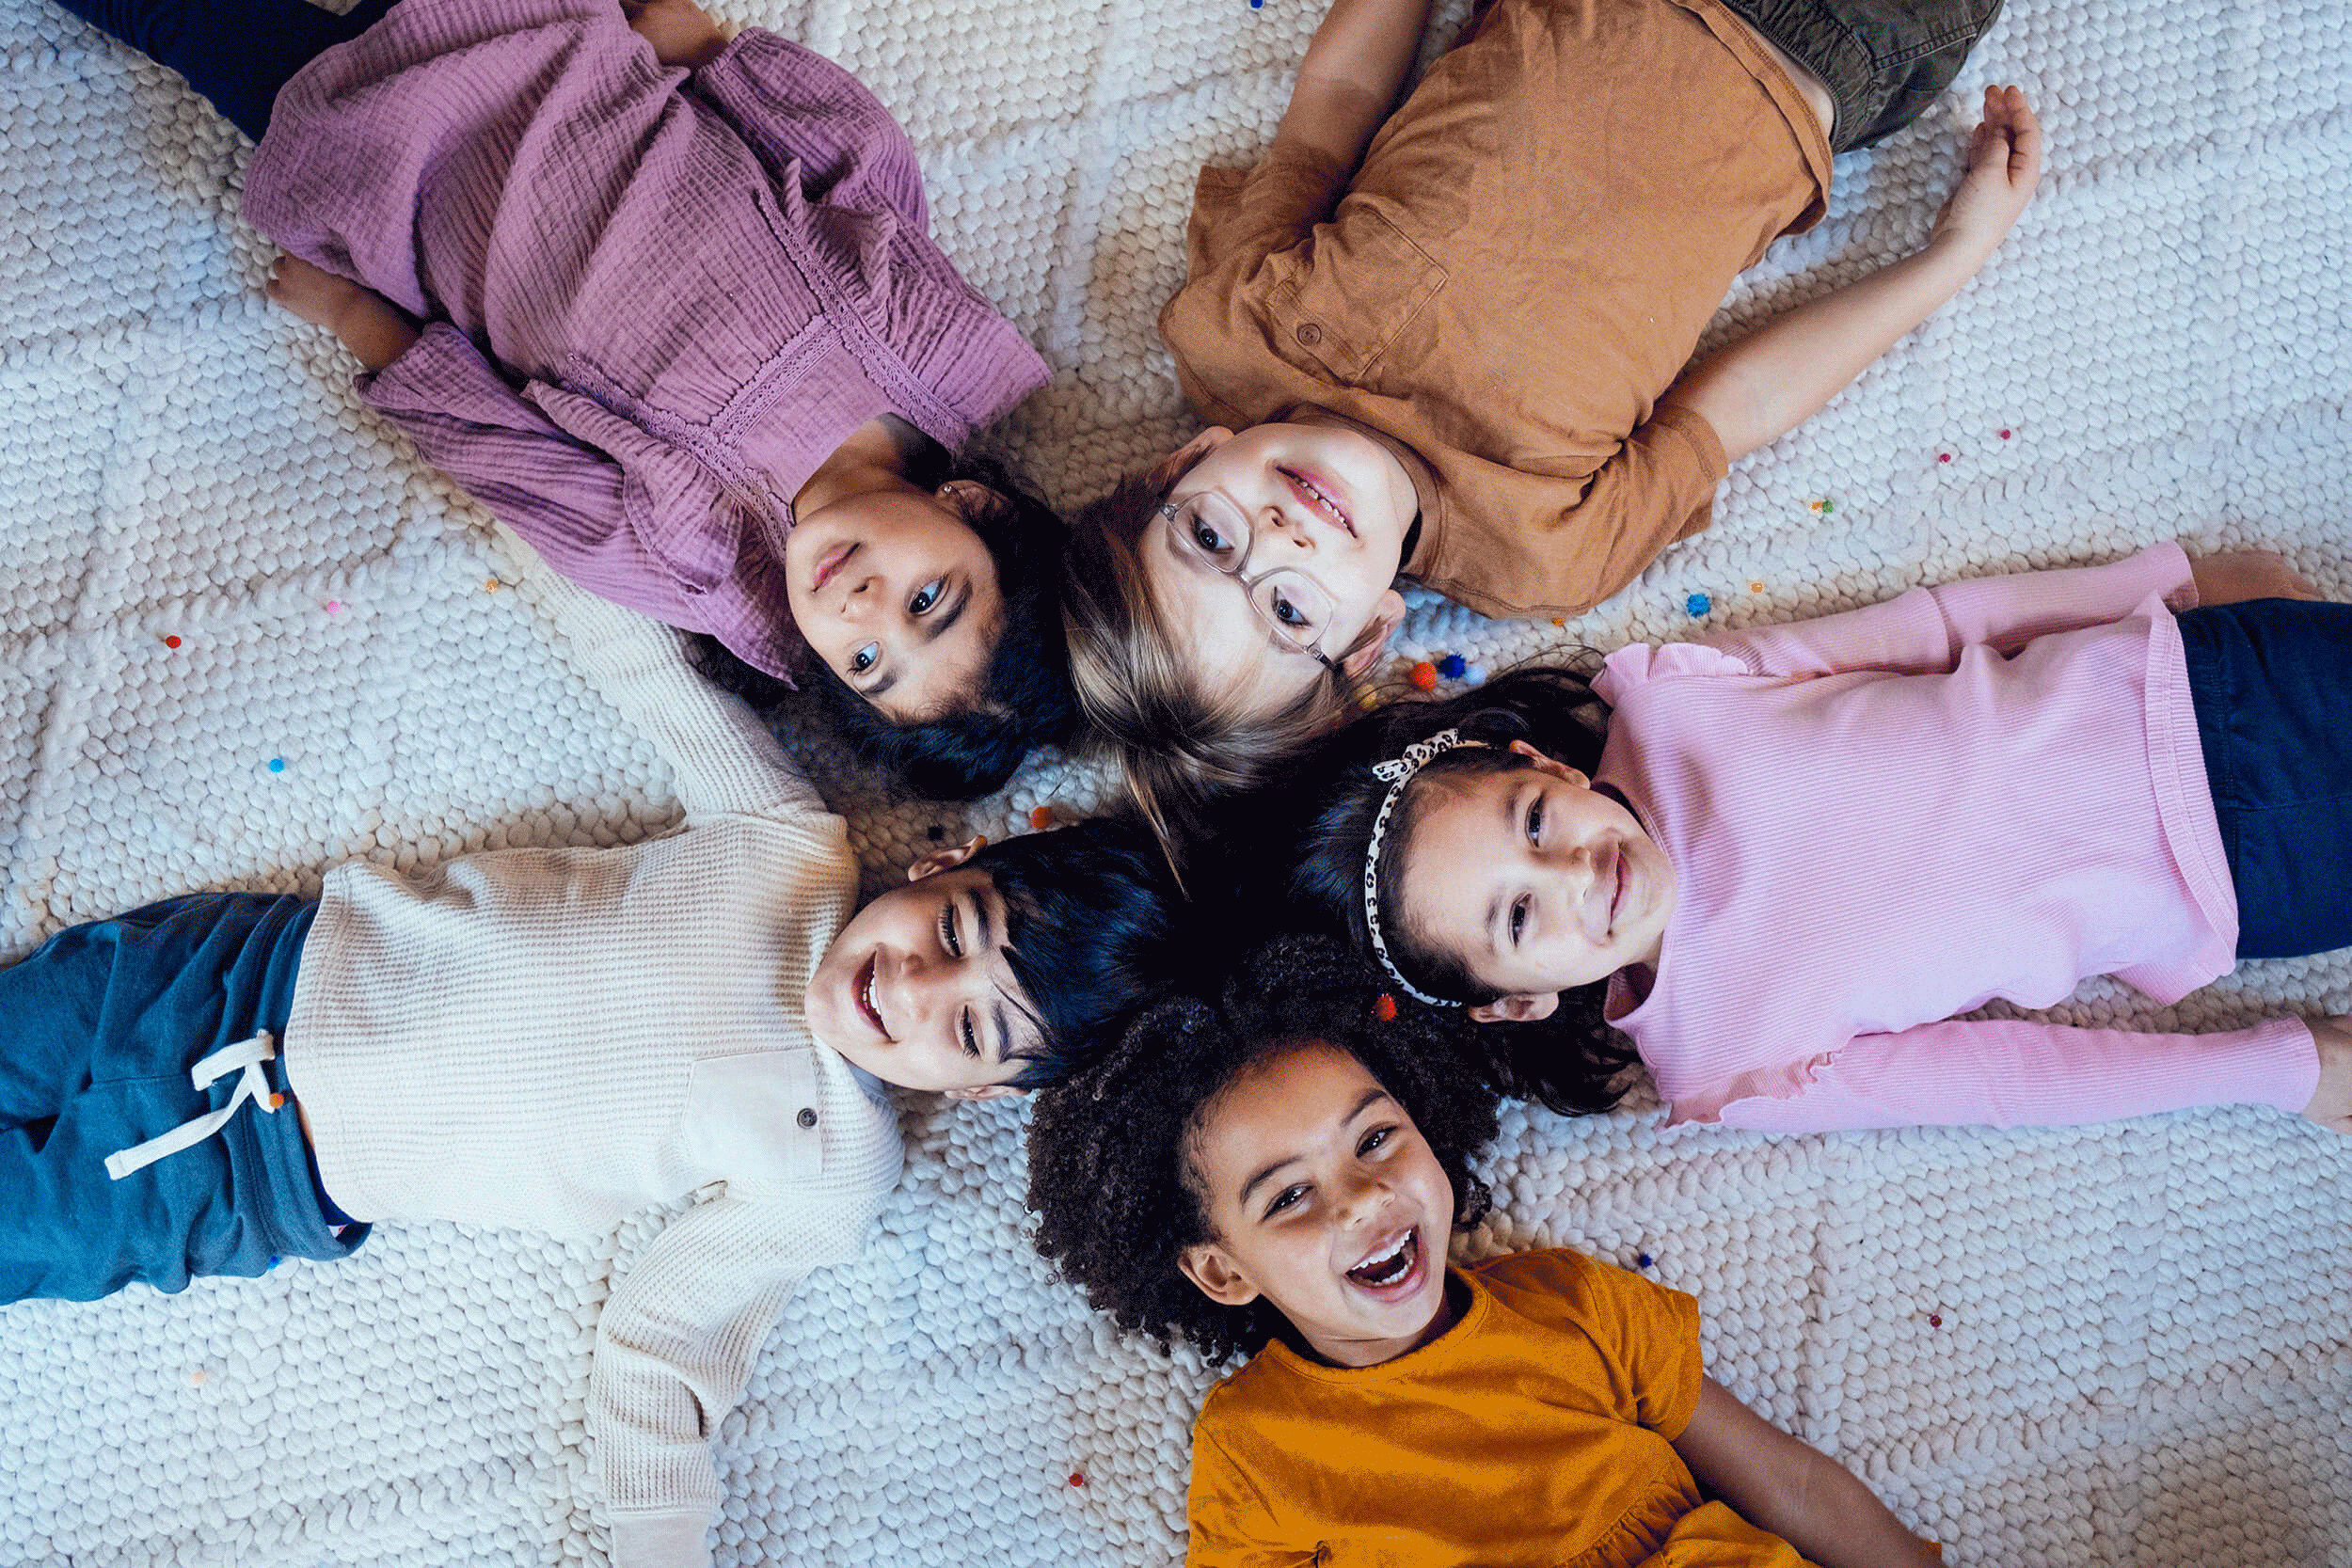 A group of children laying together